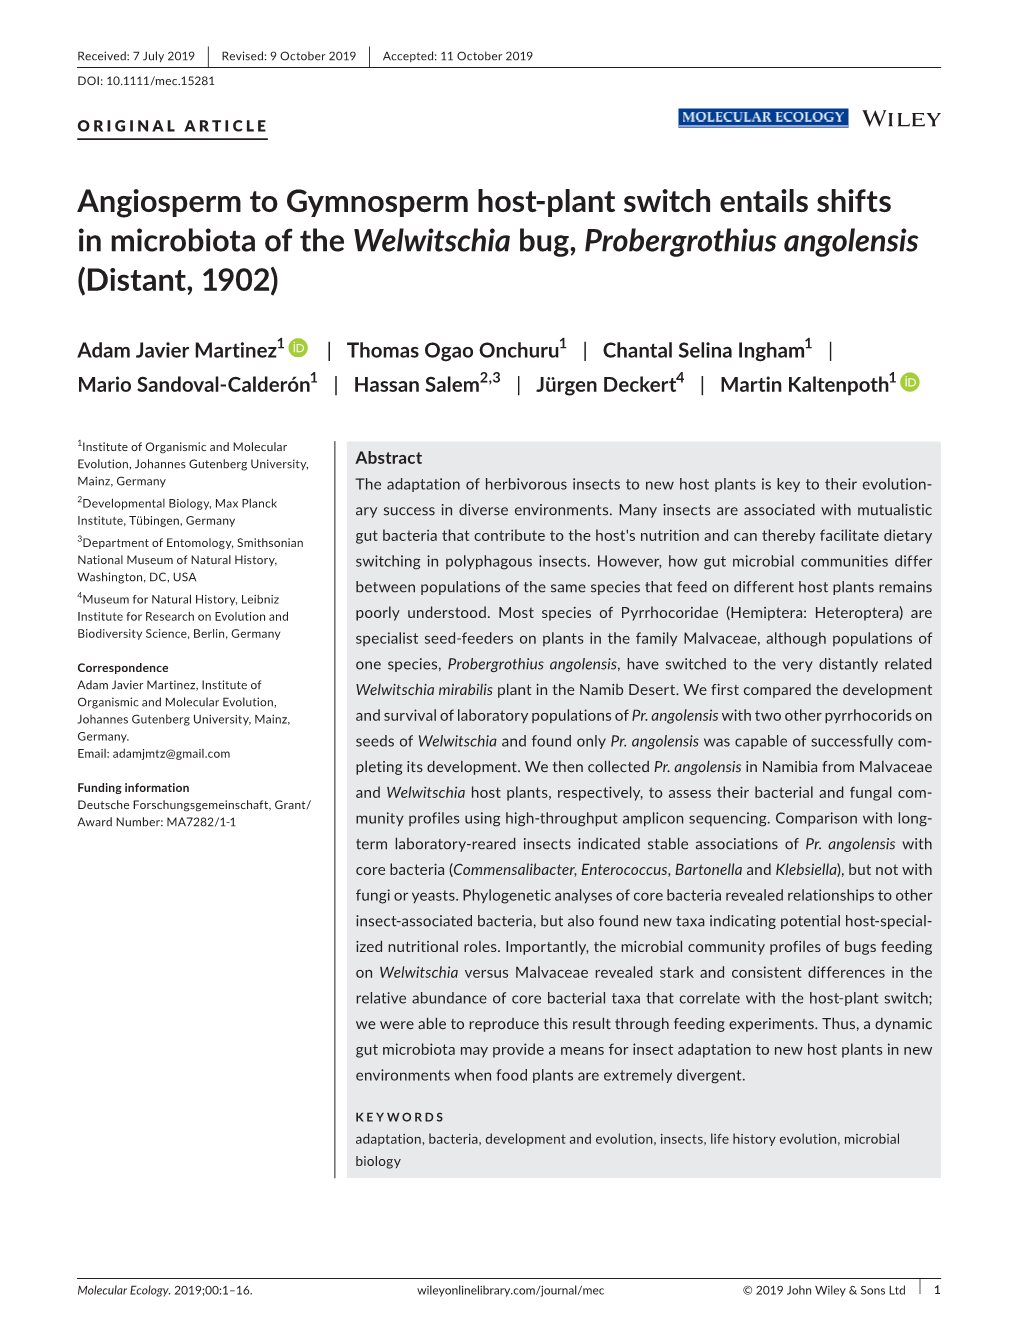 Plant Switch Entails Shifts in Microbiota of the Welwitschia Bug, Probergrothius Angolensis (Distant, 1902)